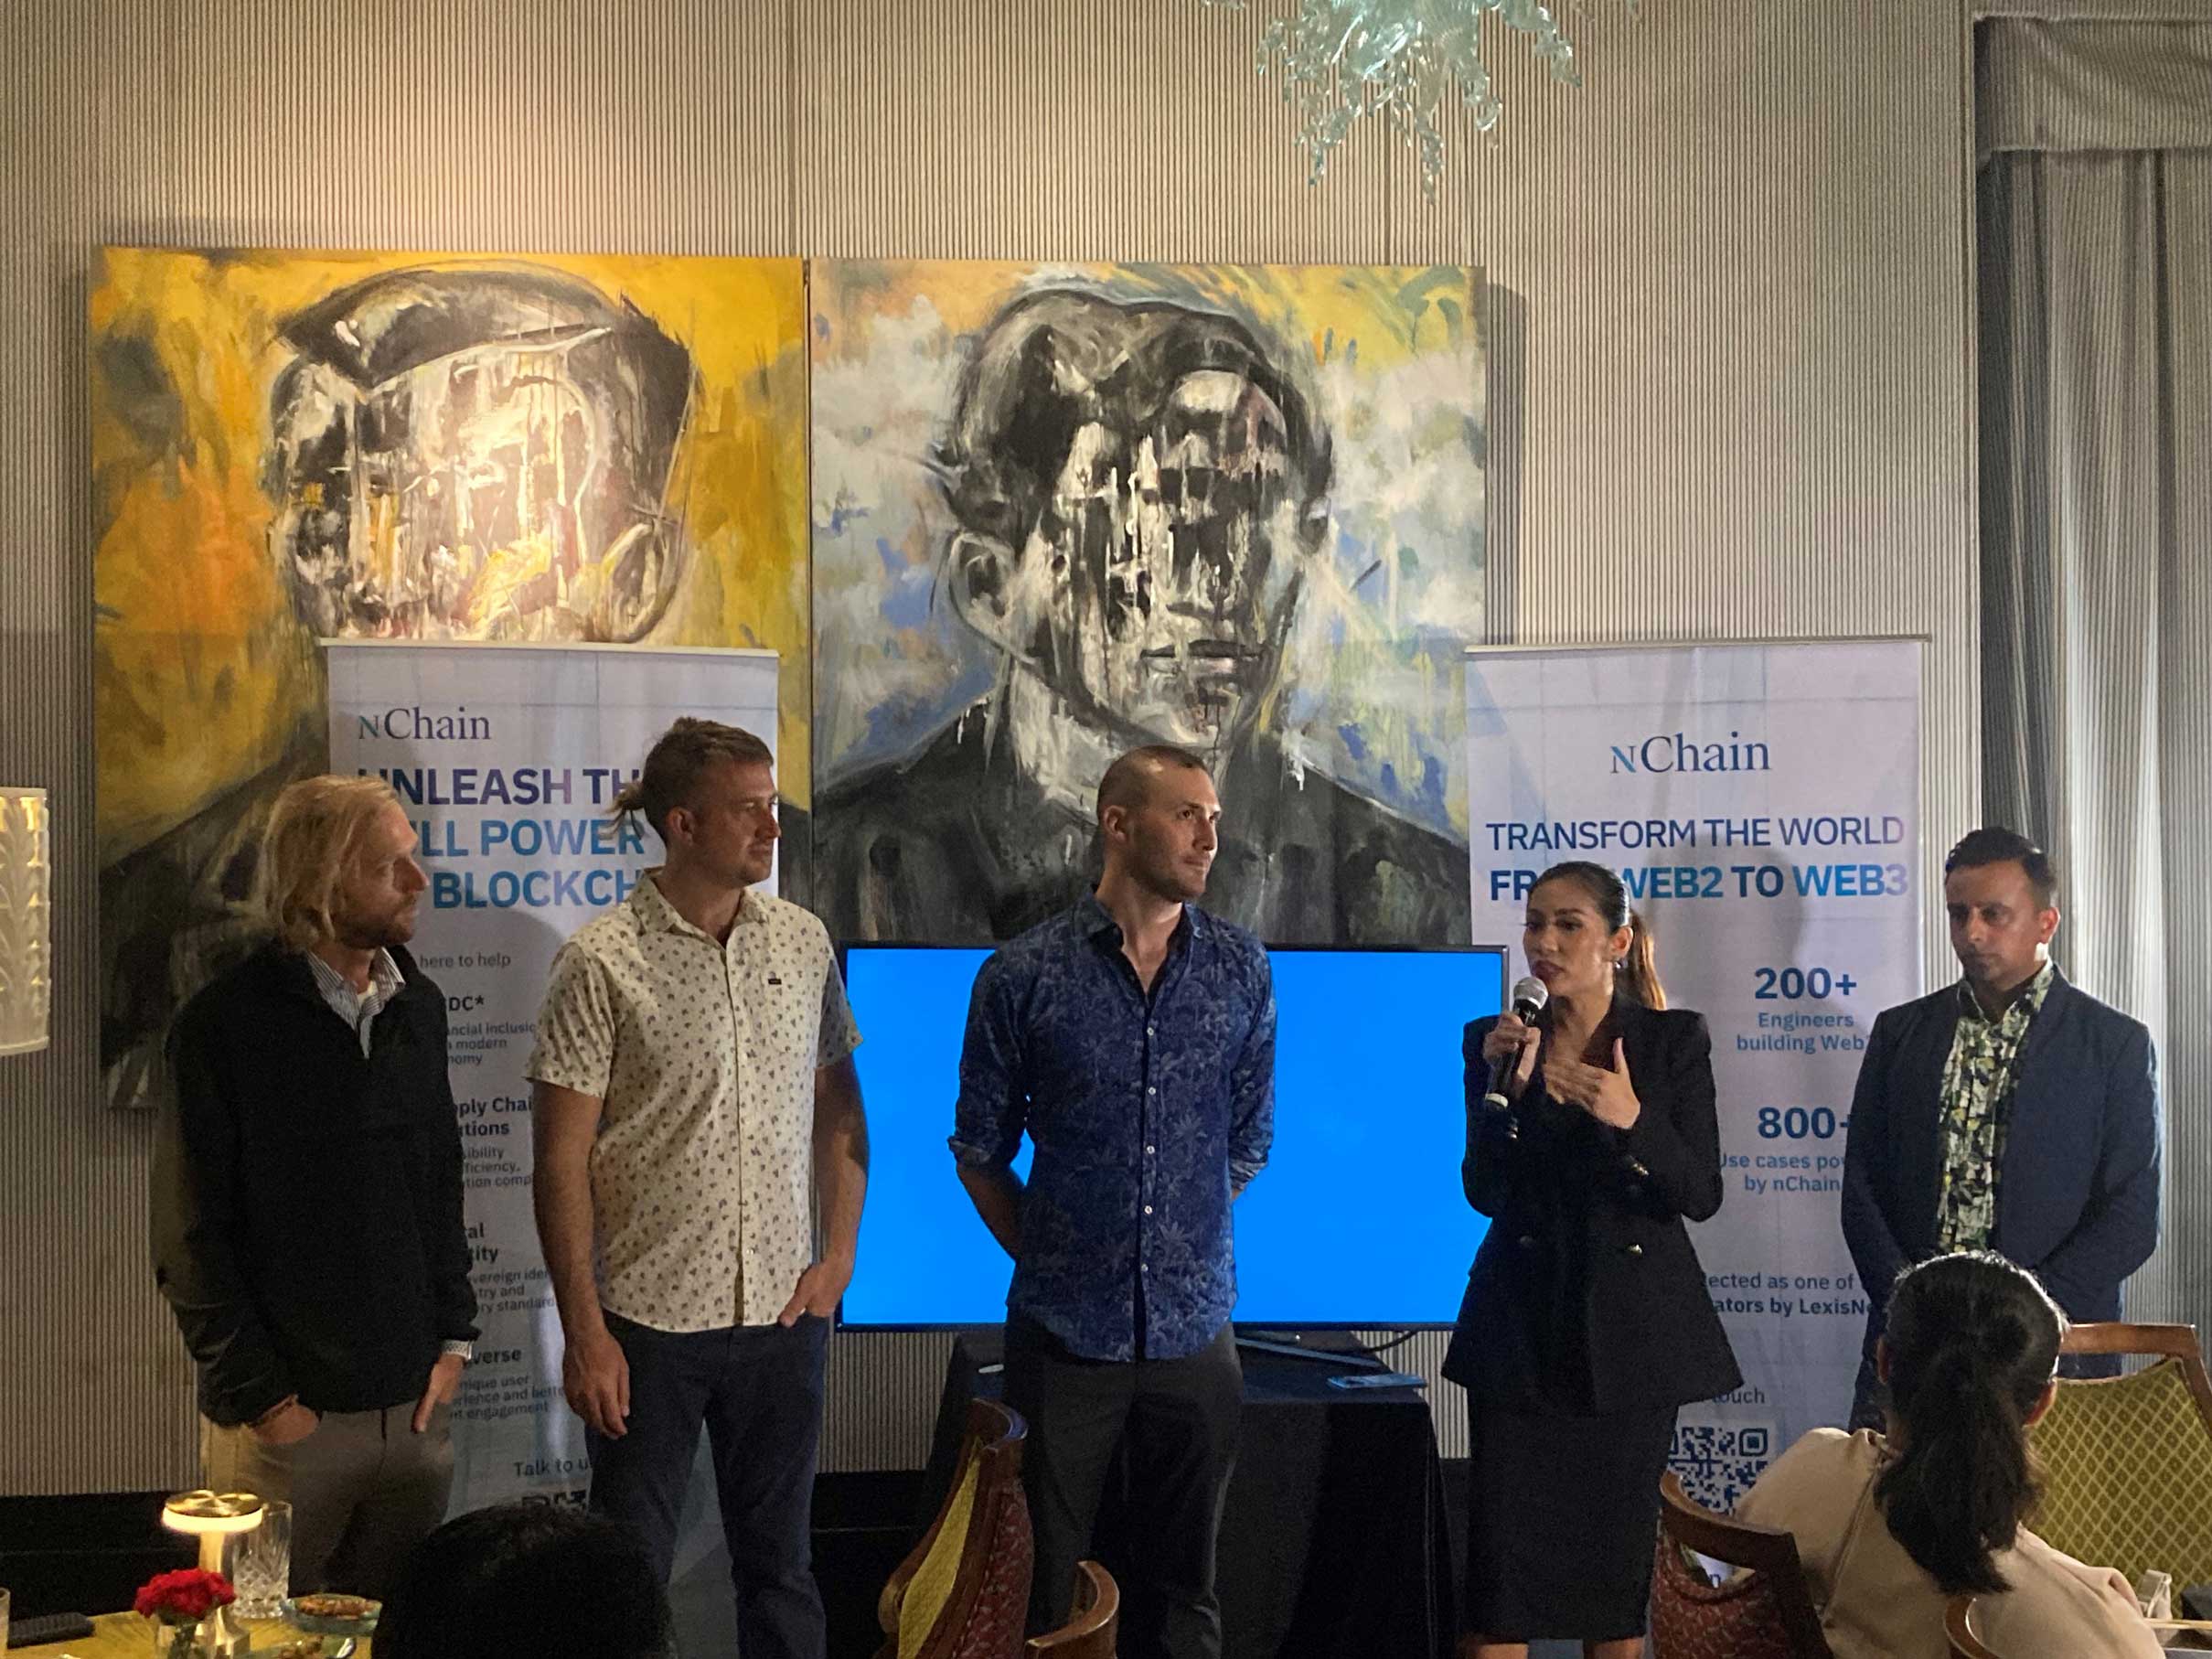 Kevin Healy, Todd Price, Evan Freeman, Stephanie Tower and Simit Naik at the Blockchain Social Philippines event